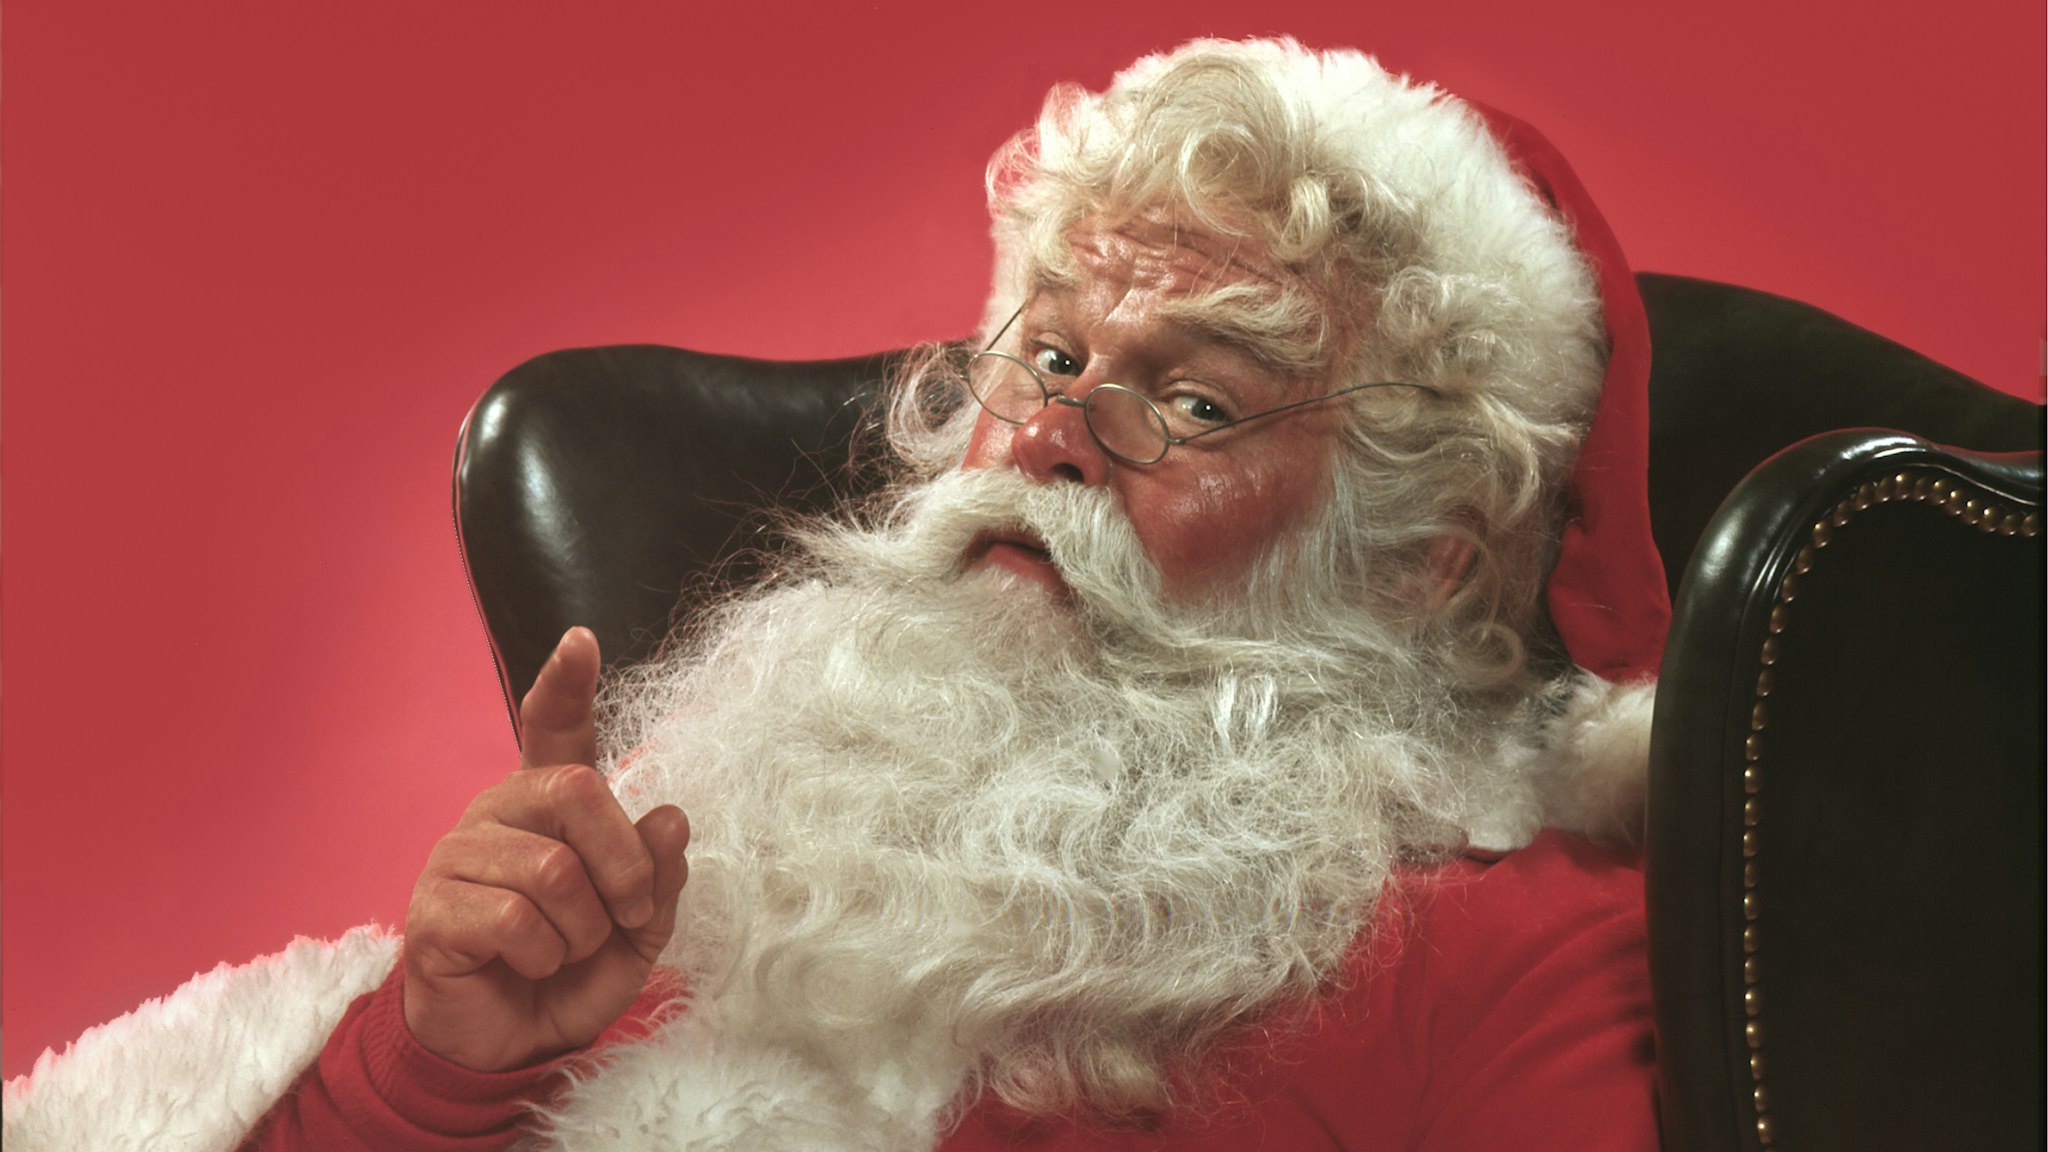 Portrait of Santa Claus sitting in a leather armchair raising one hand in a knowing gesture, 1980. United States.